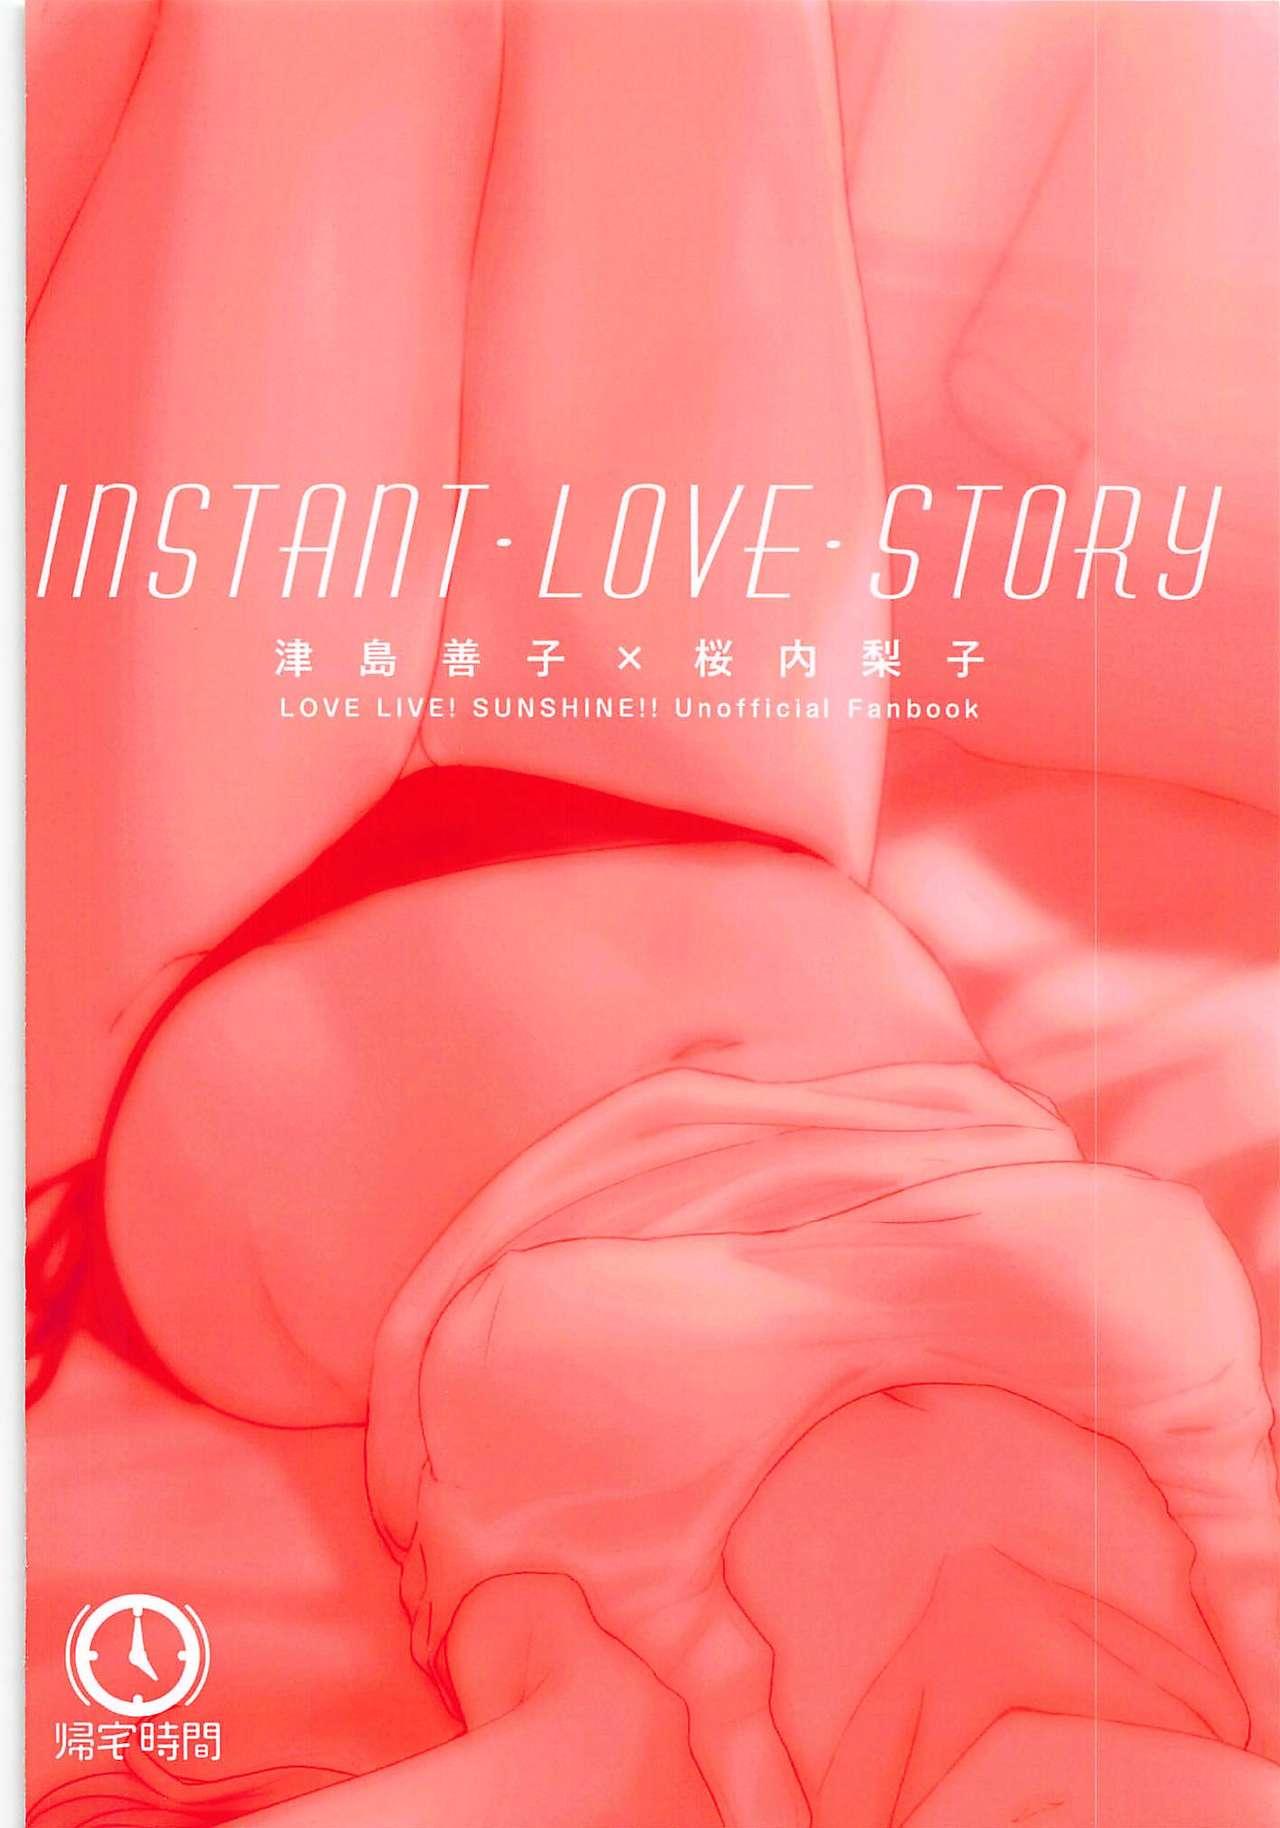 Girl On Girl INSTANT LOVE STORY - Love live sunshine Oral Sex - Page 26